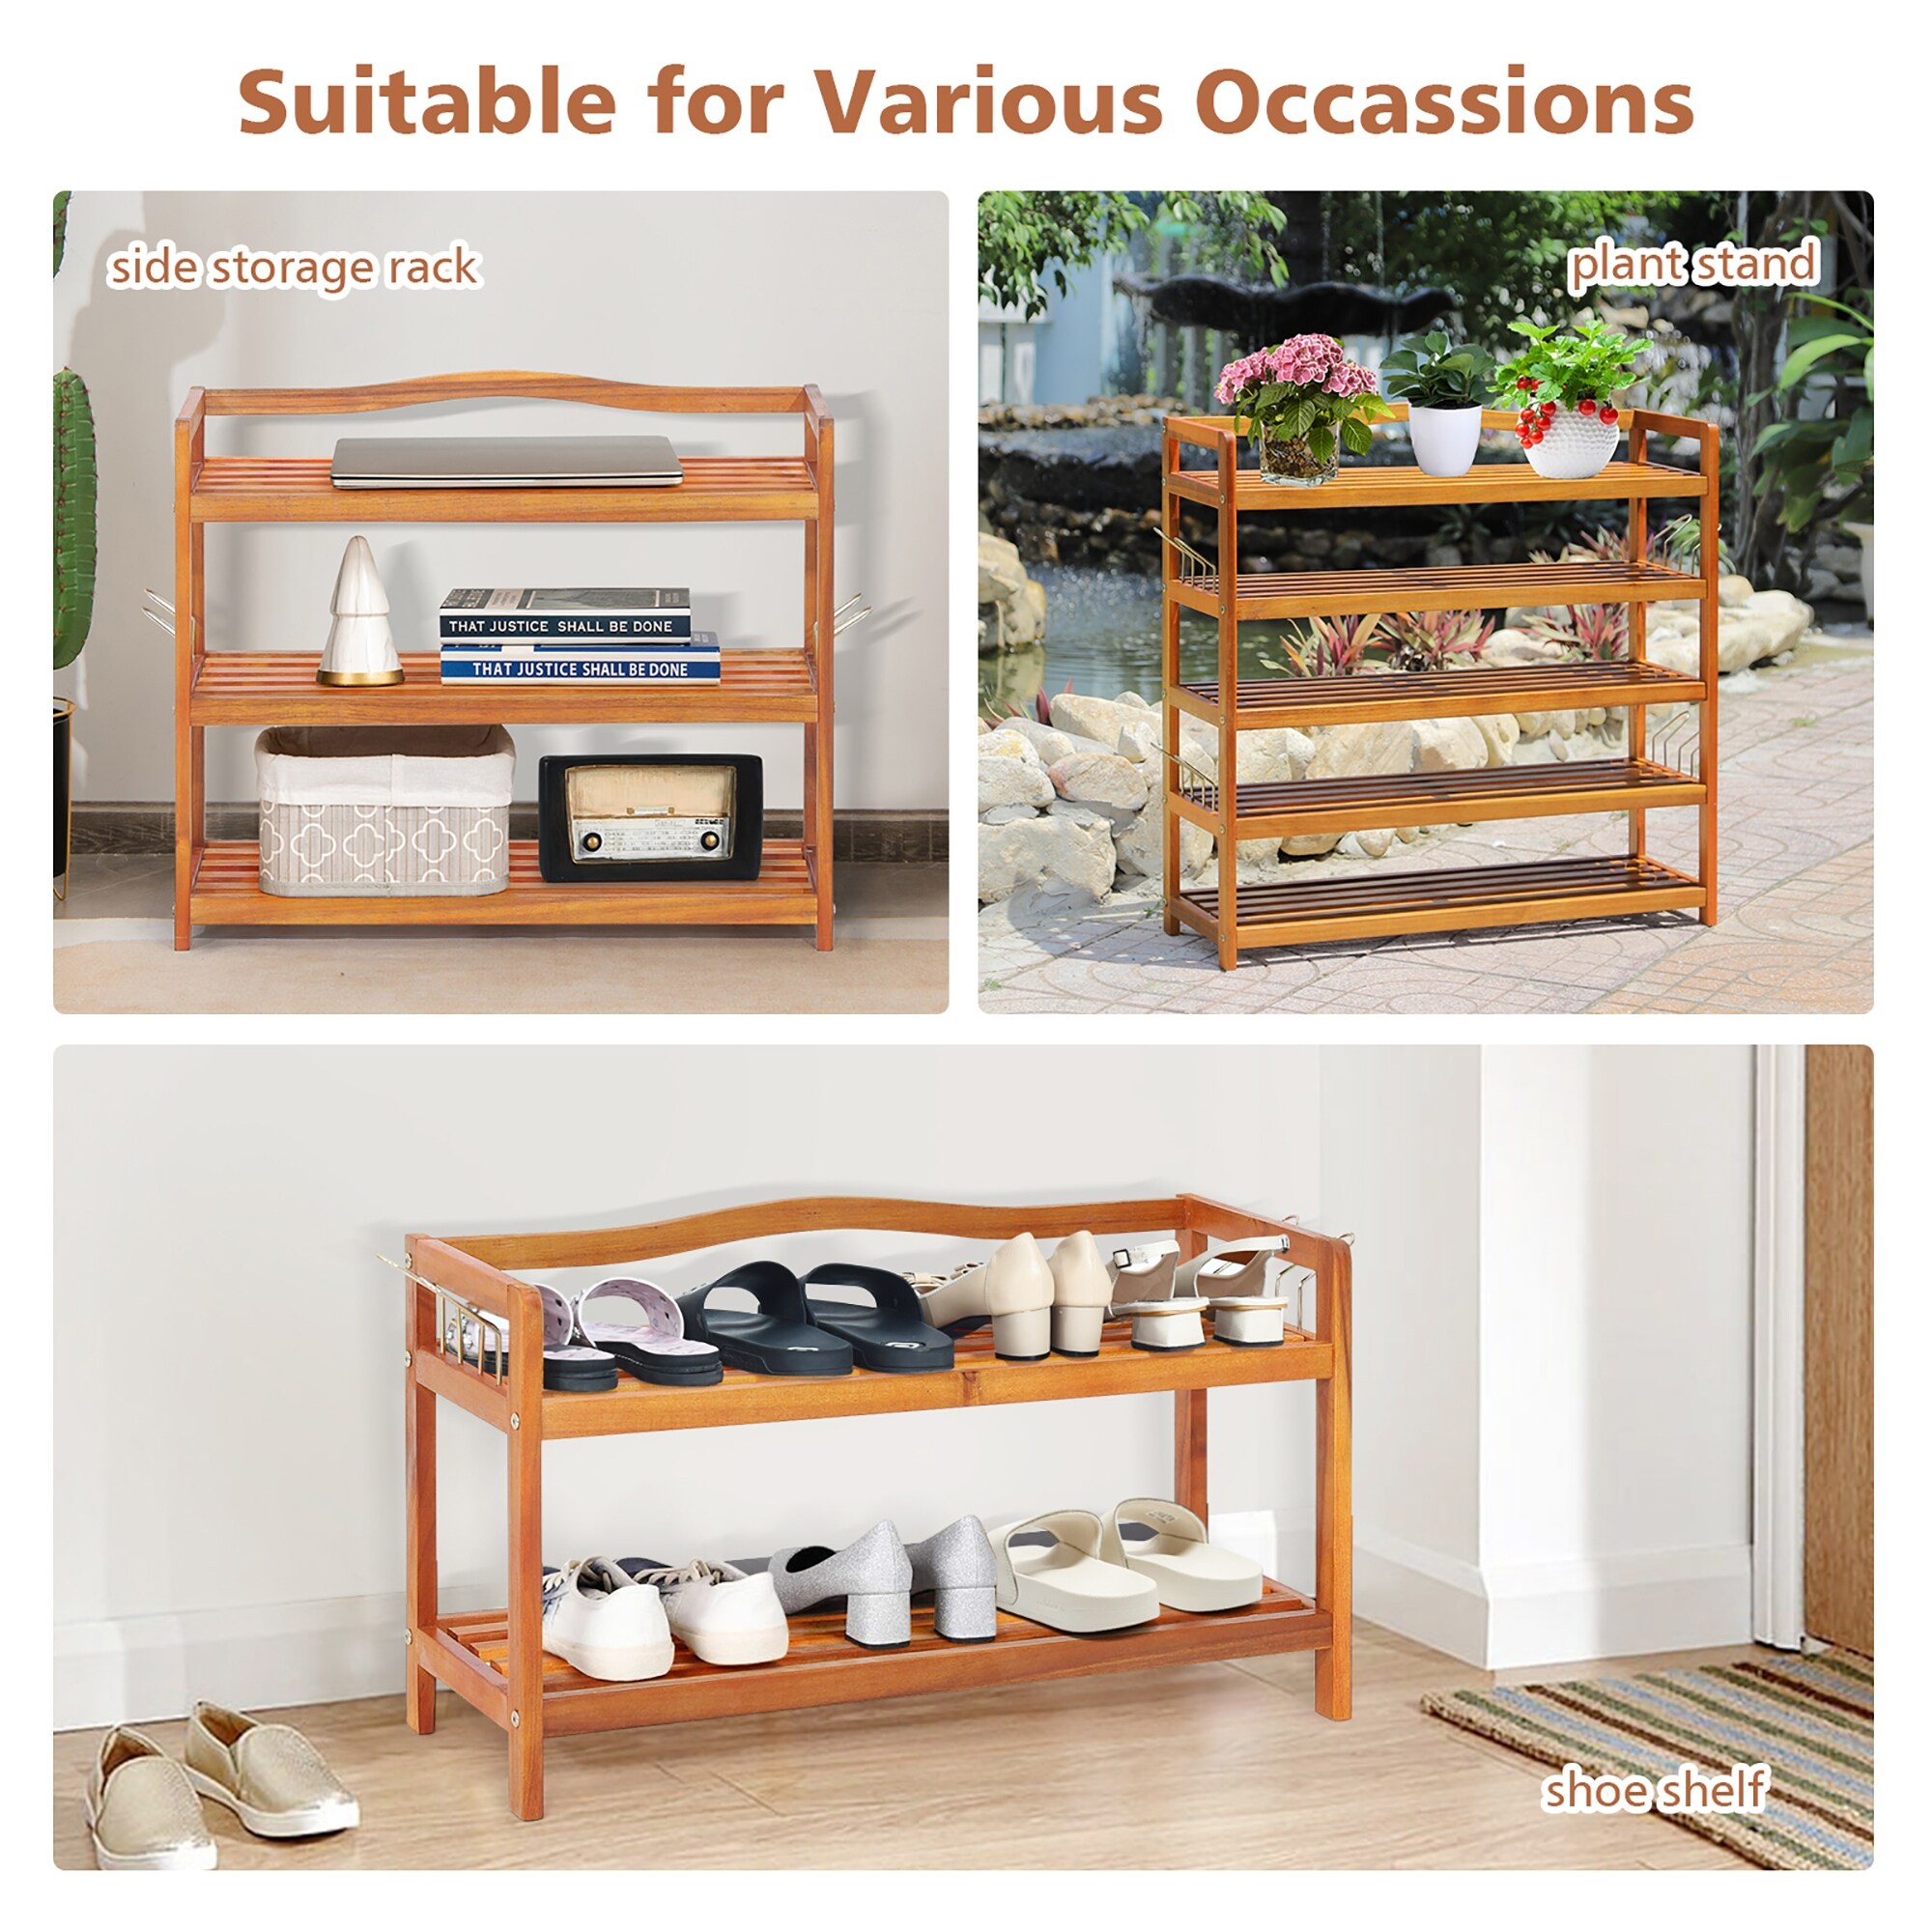 https://ak1.ostkcdn.com/images/products/is/images/direct/2430ff34b095a3c4e347047f5b2d0cdd61ab89d7/Costway-5-Tier-Wood-Shoe-Rack-Freestanding-Large-Shoe-Storage.jpg